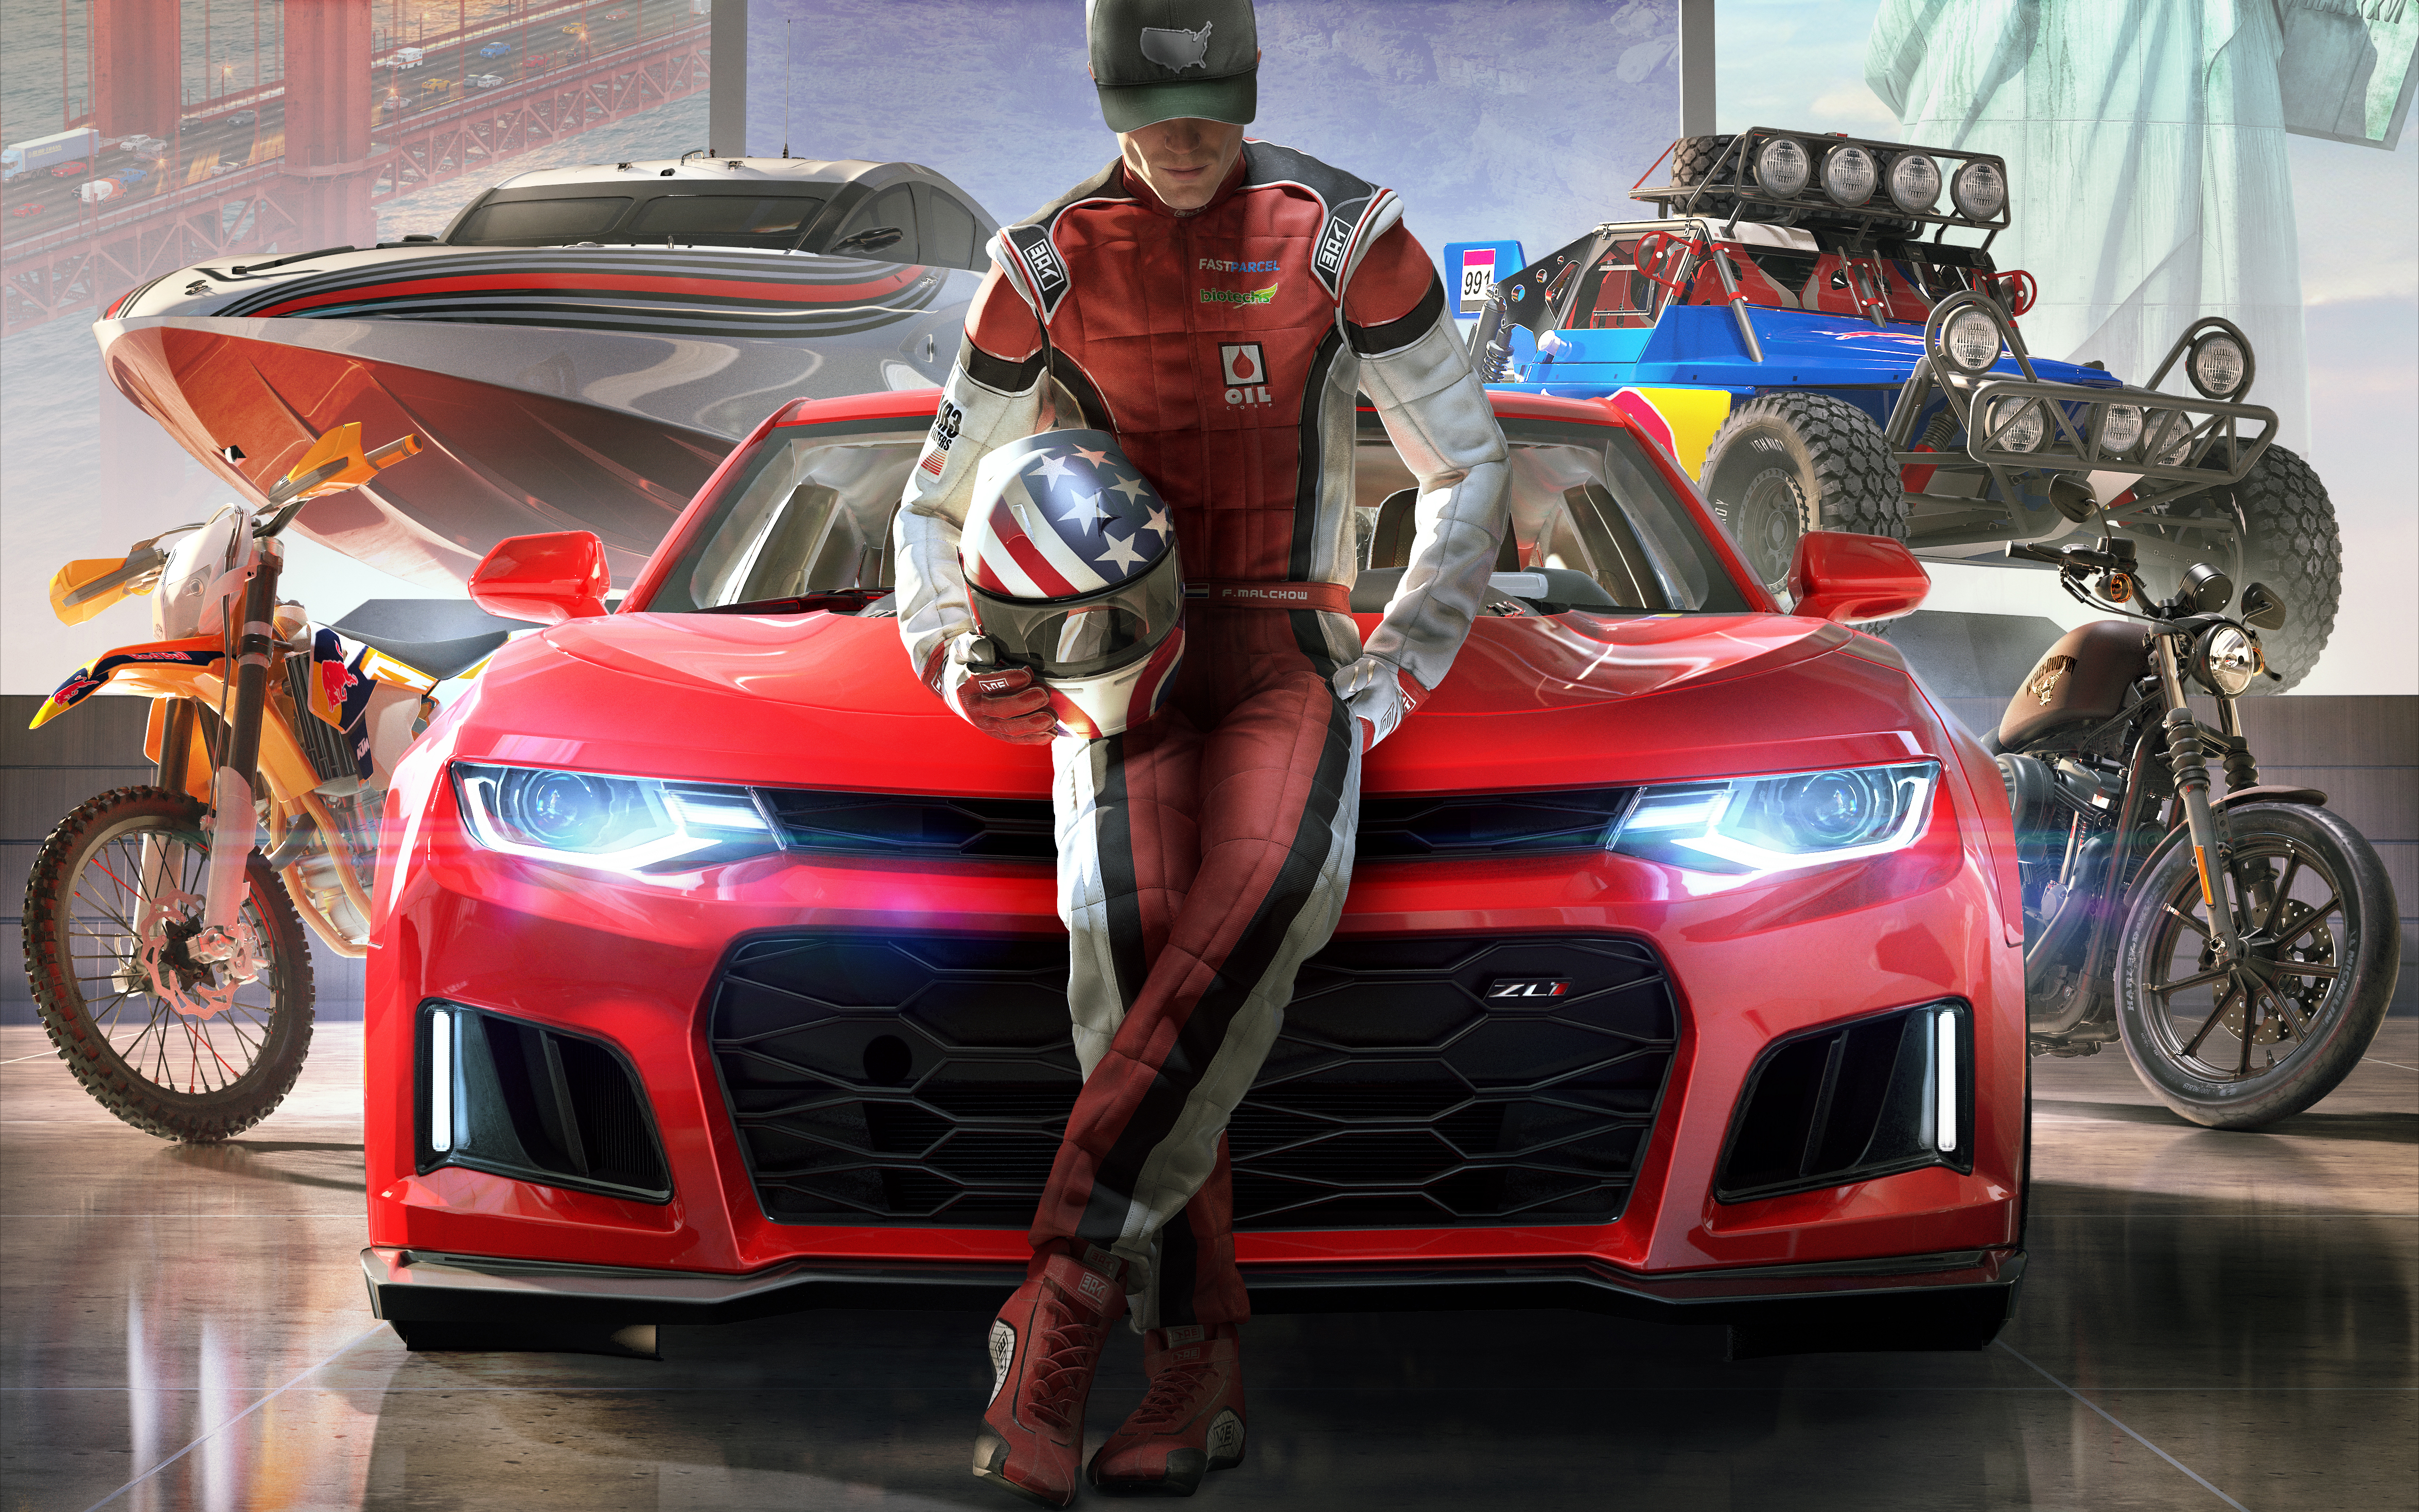 60+ The Crew 2 HD Wallpapers and Backgrounds